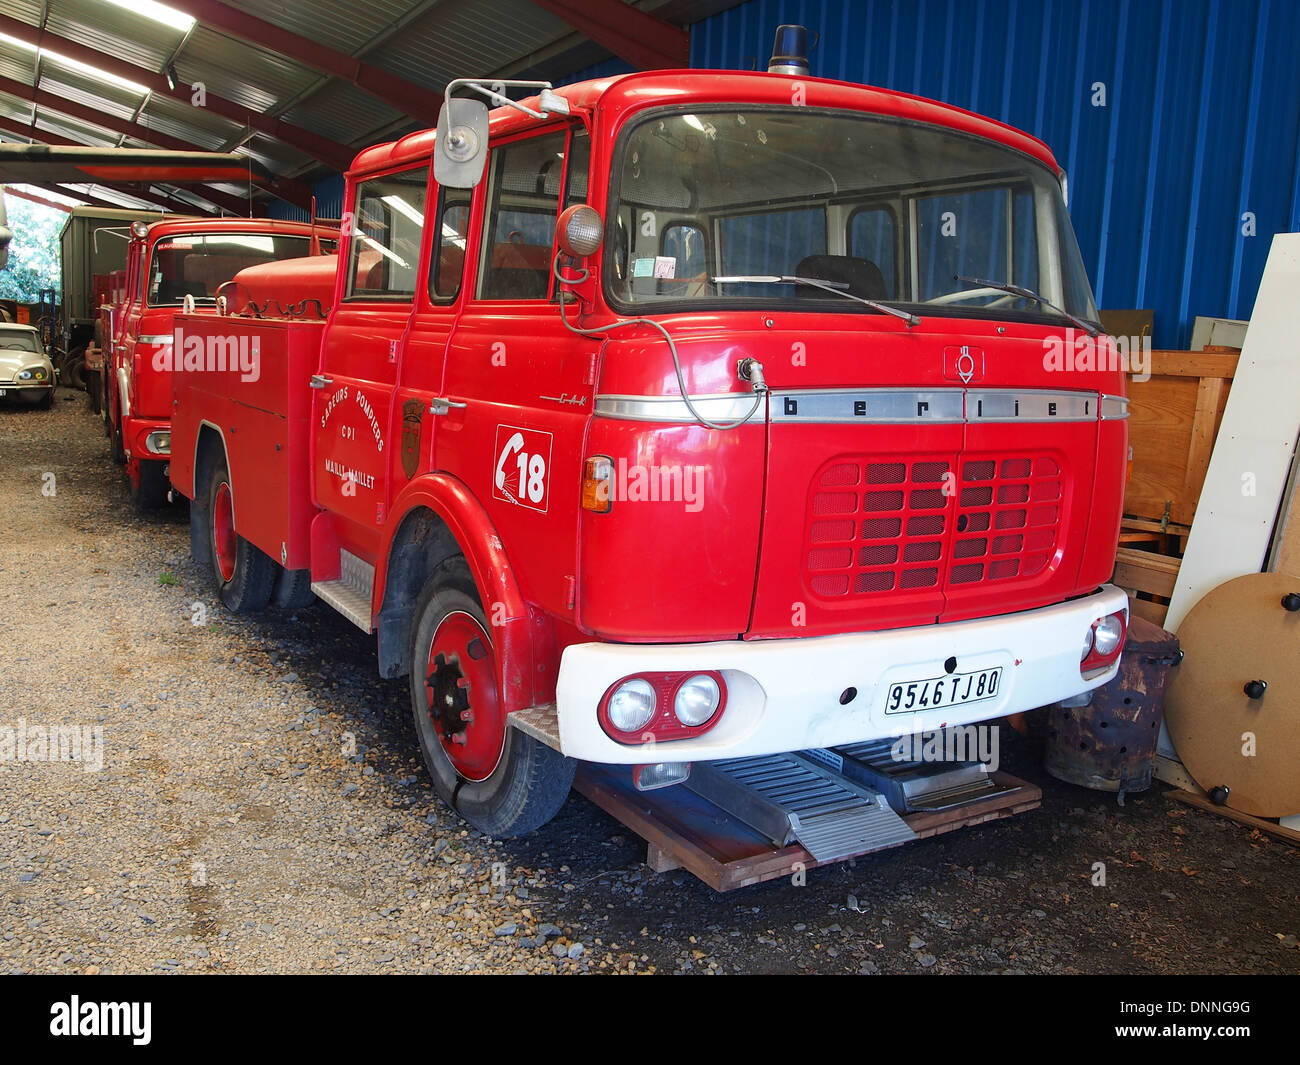 Berliet GAK Fire Engine '9546 TJ 80' Sapeurs Pompiers Mailly Maillet Stock  Photo - Alamy